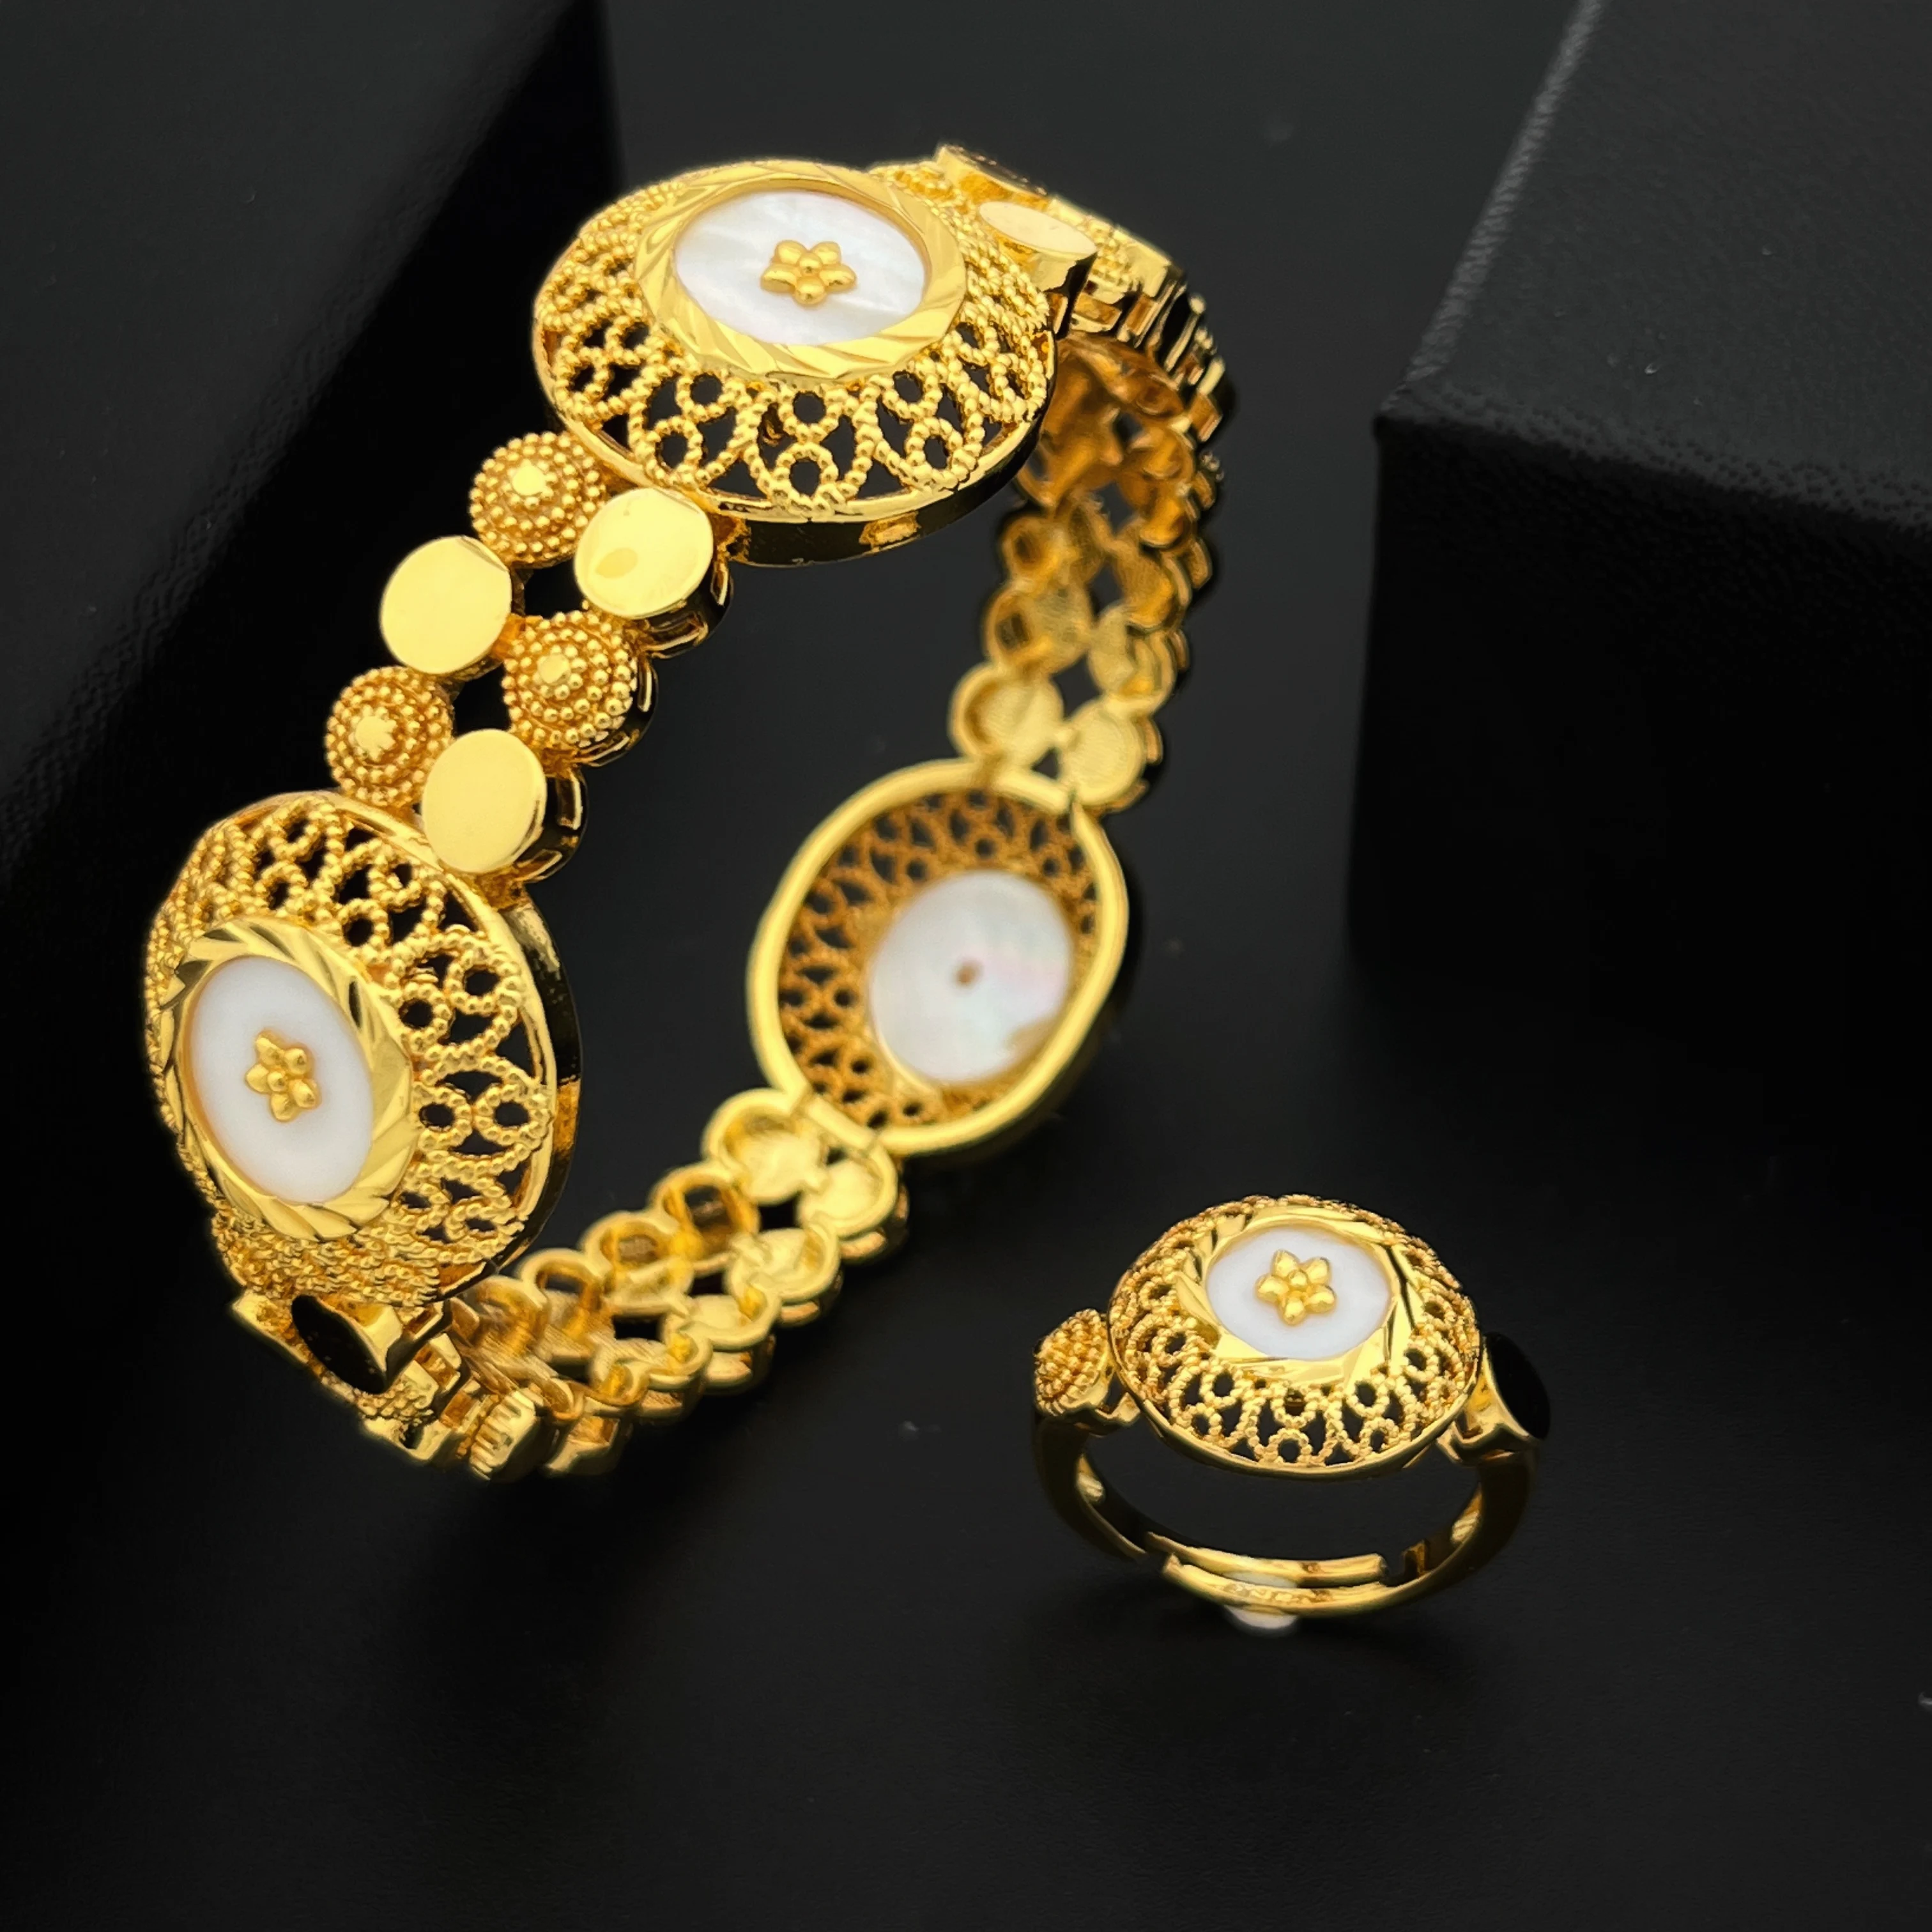 Stylish African and Middle Eastern Handcrafted Bracelet and Ring Set - Streamlined Design, Exquisite and Delicate, Demonstrating